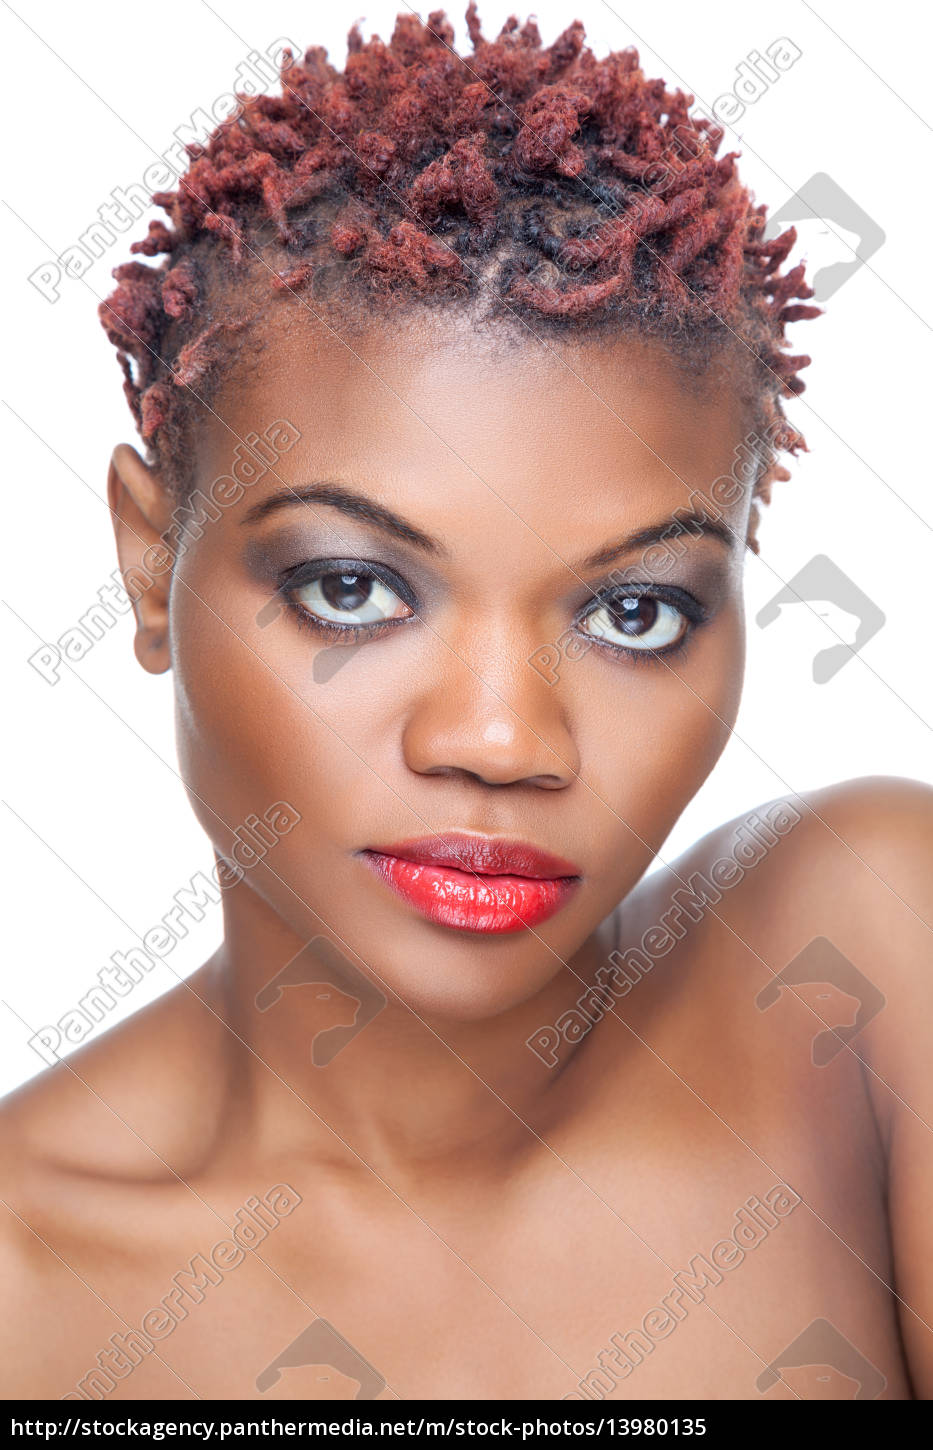 Black Beauty With Short Spiky Hair Royalty Free Image 13980135 Panthermedia Stock Agency